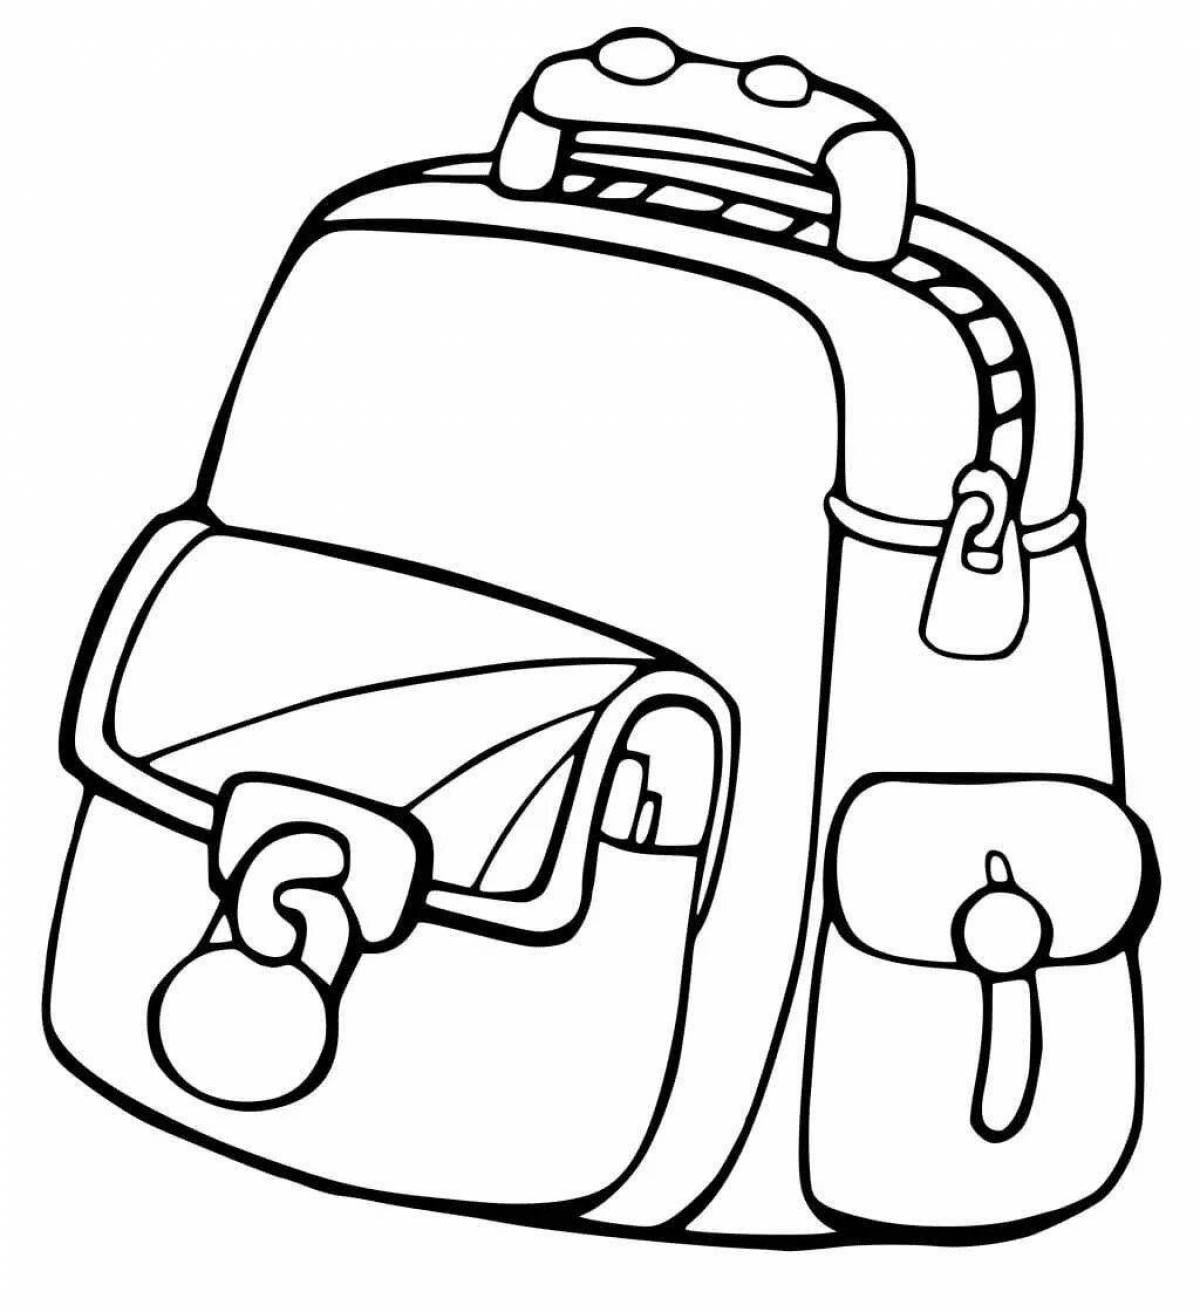 Coloring for a spectacular backpack